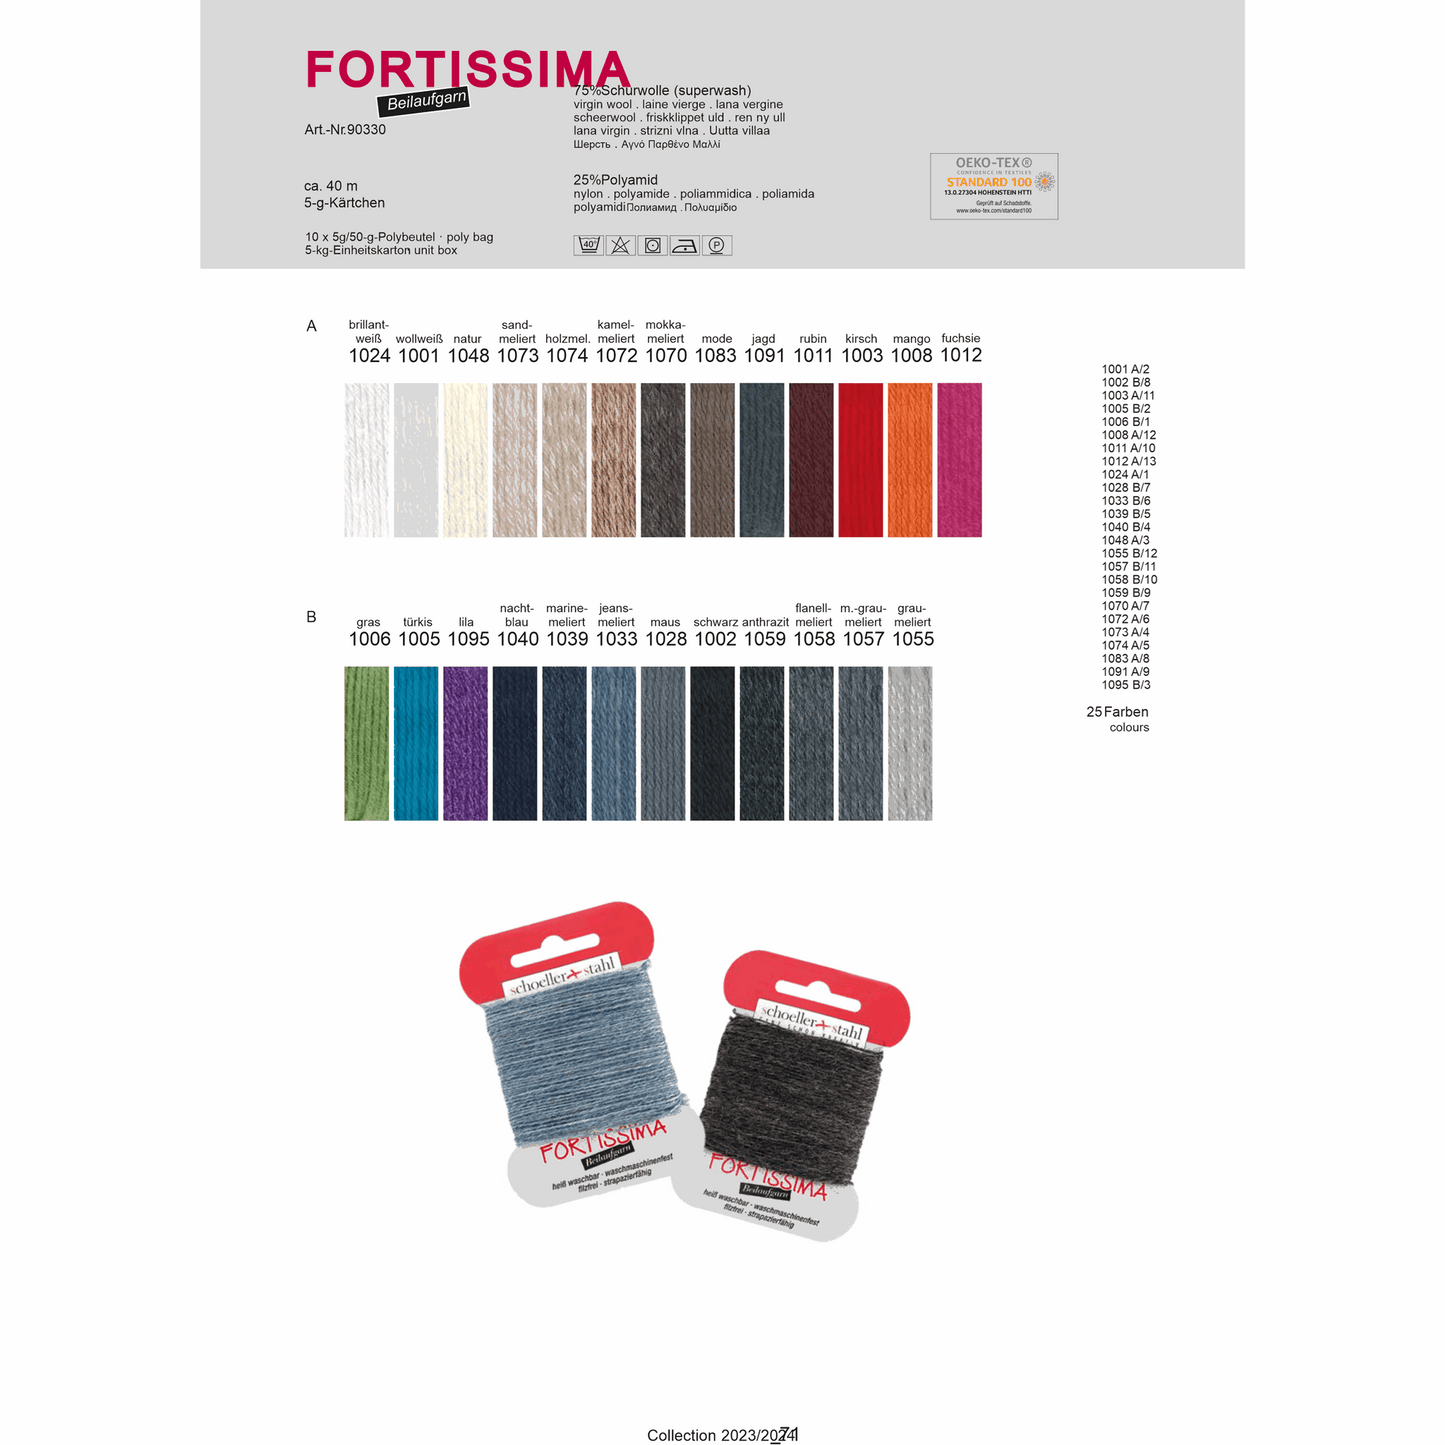 Fortissima thread 5g, 90330, color 1001, off-white